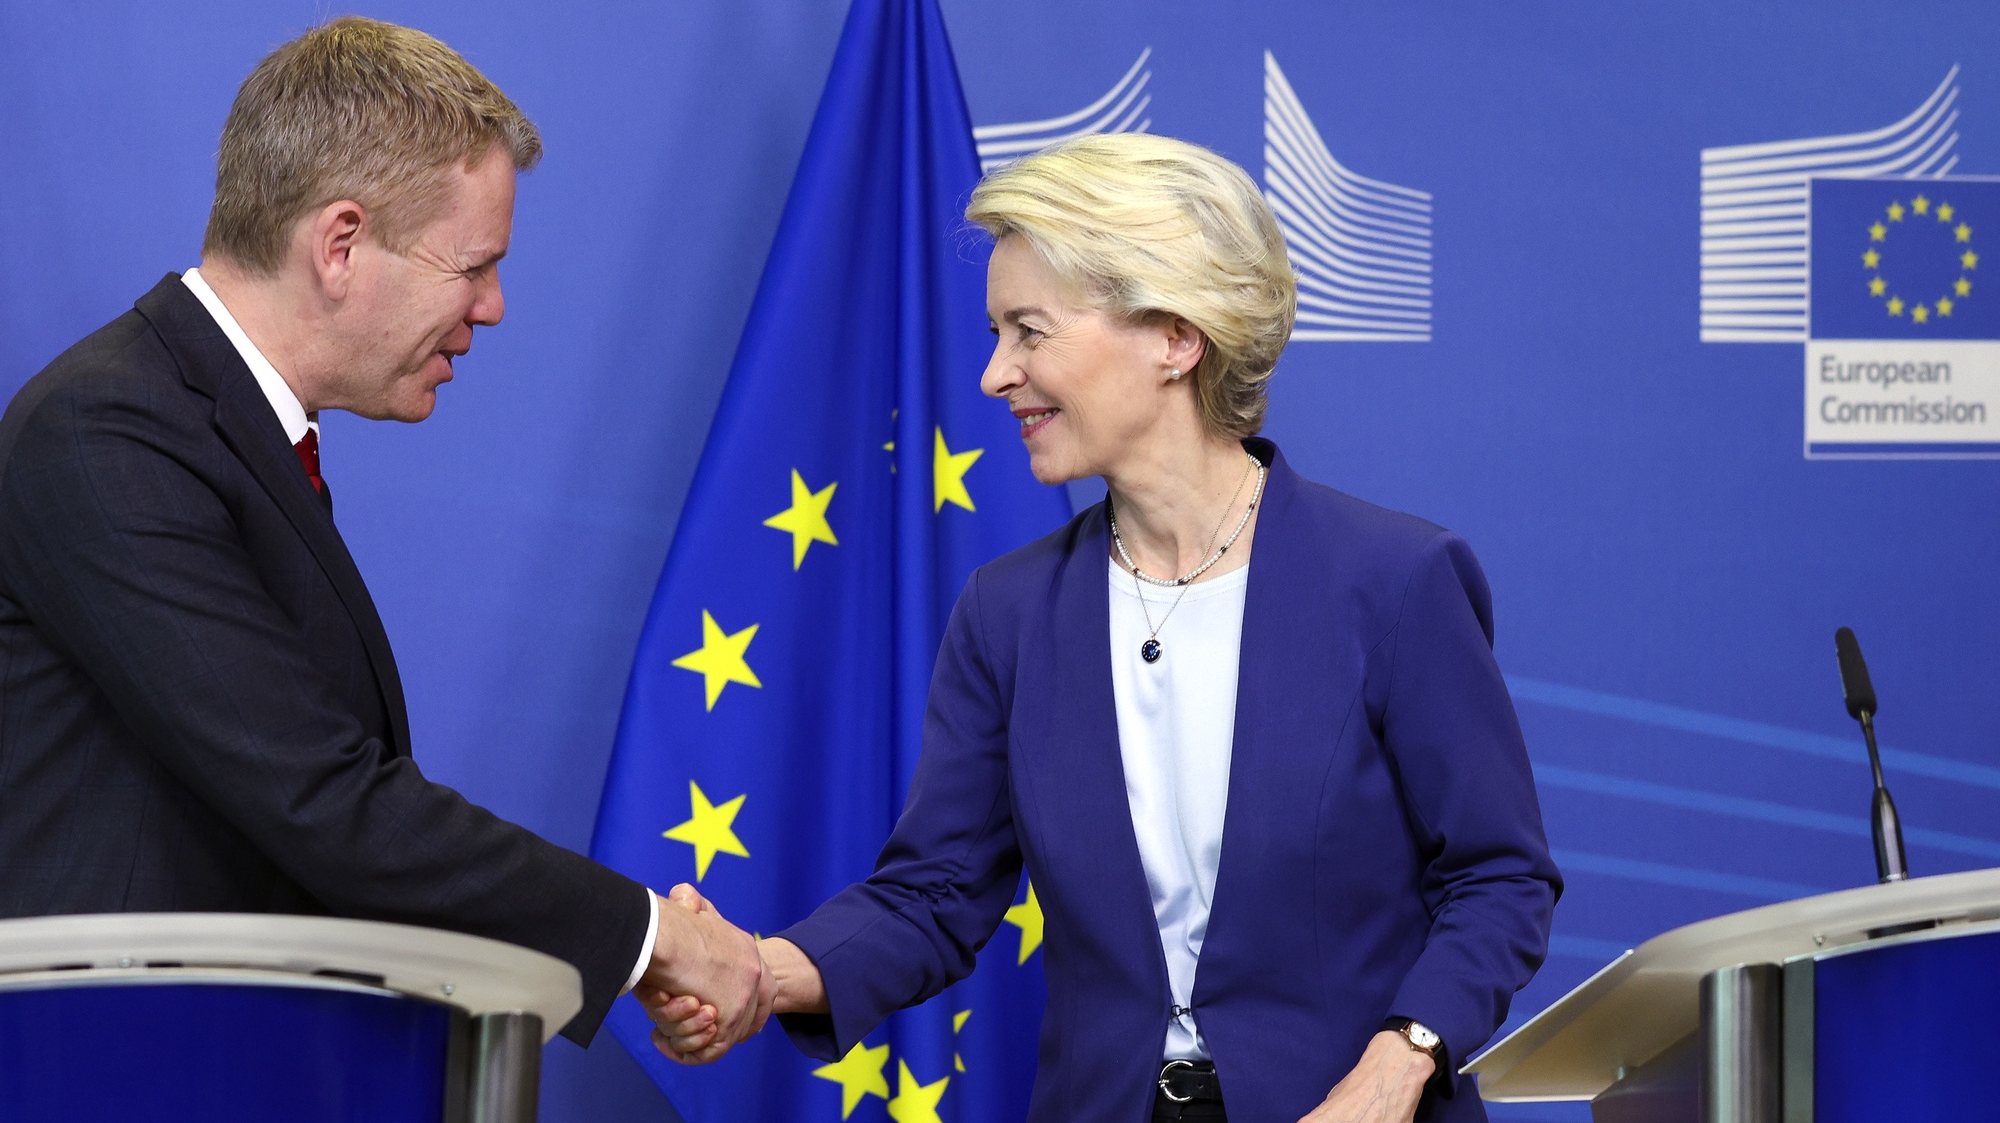 epa10735819 New Zealand Prime Minister Chris Hipkins (L) and European Commission President Ursula von der Leyen (R) shake hands during the signing ceremony of the EU-New Zealand Free Trade Agreement, at the European Commission in Brussels, Belgium, 09 July 2023. The agreement opens the doors to New Zealand’s participation in the framework programme for research and innovation Horizon Europe (2021-2027).  EPA/JULIEN WARNAND